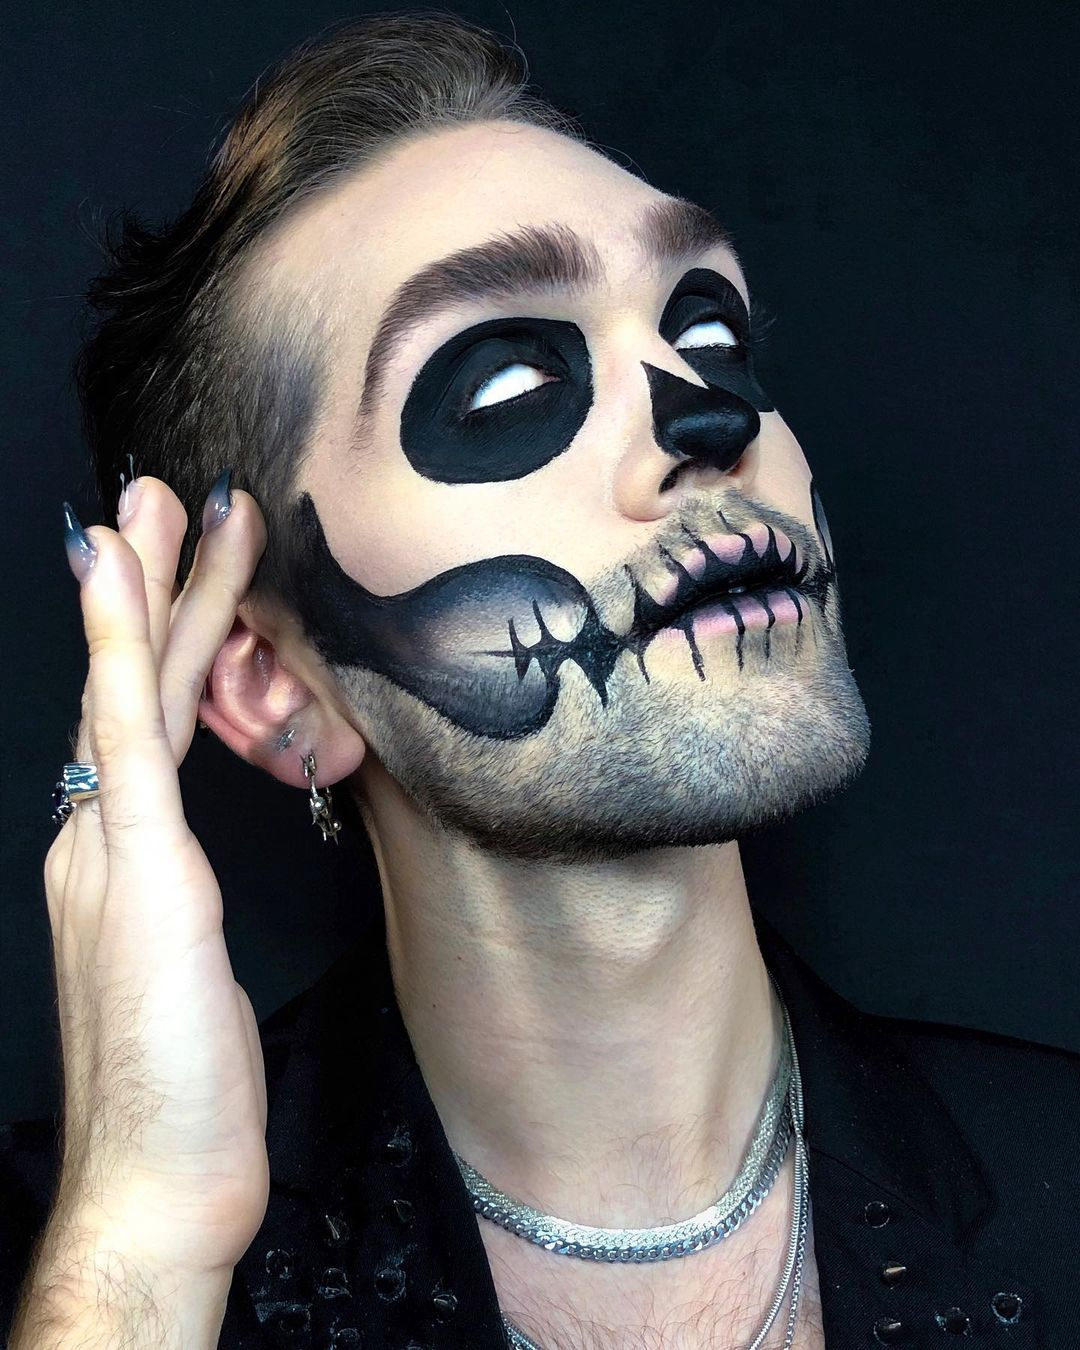 M·A·C Cosmetics - We’re literally dead over this #SkeletonMakeup